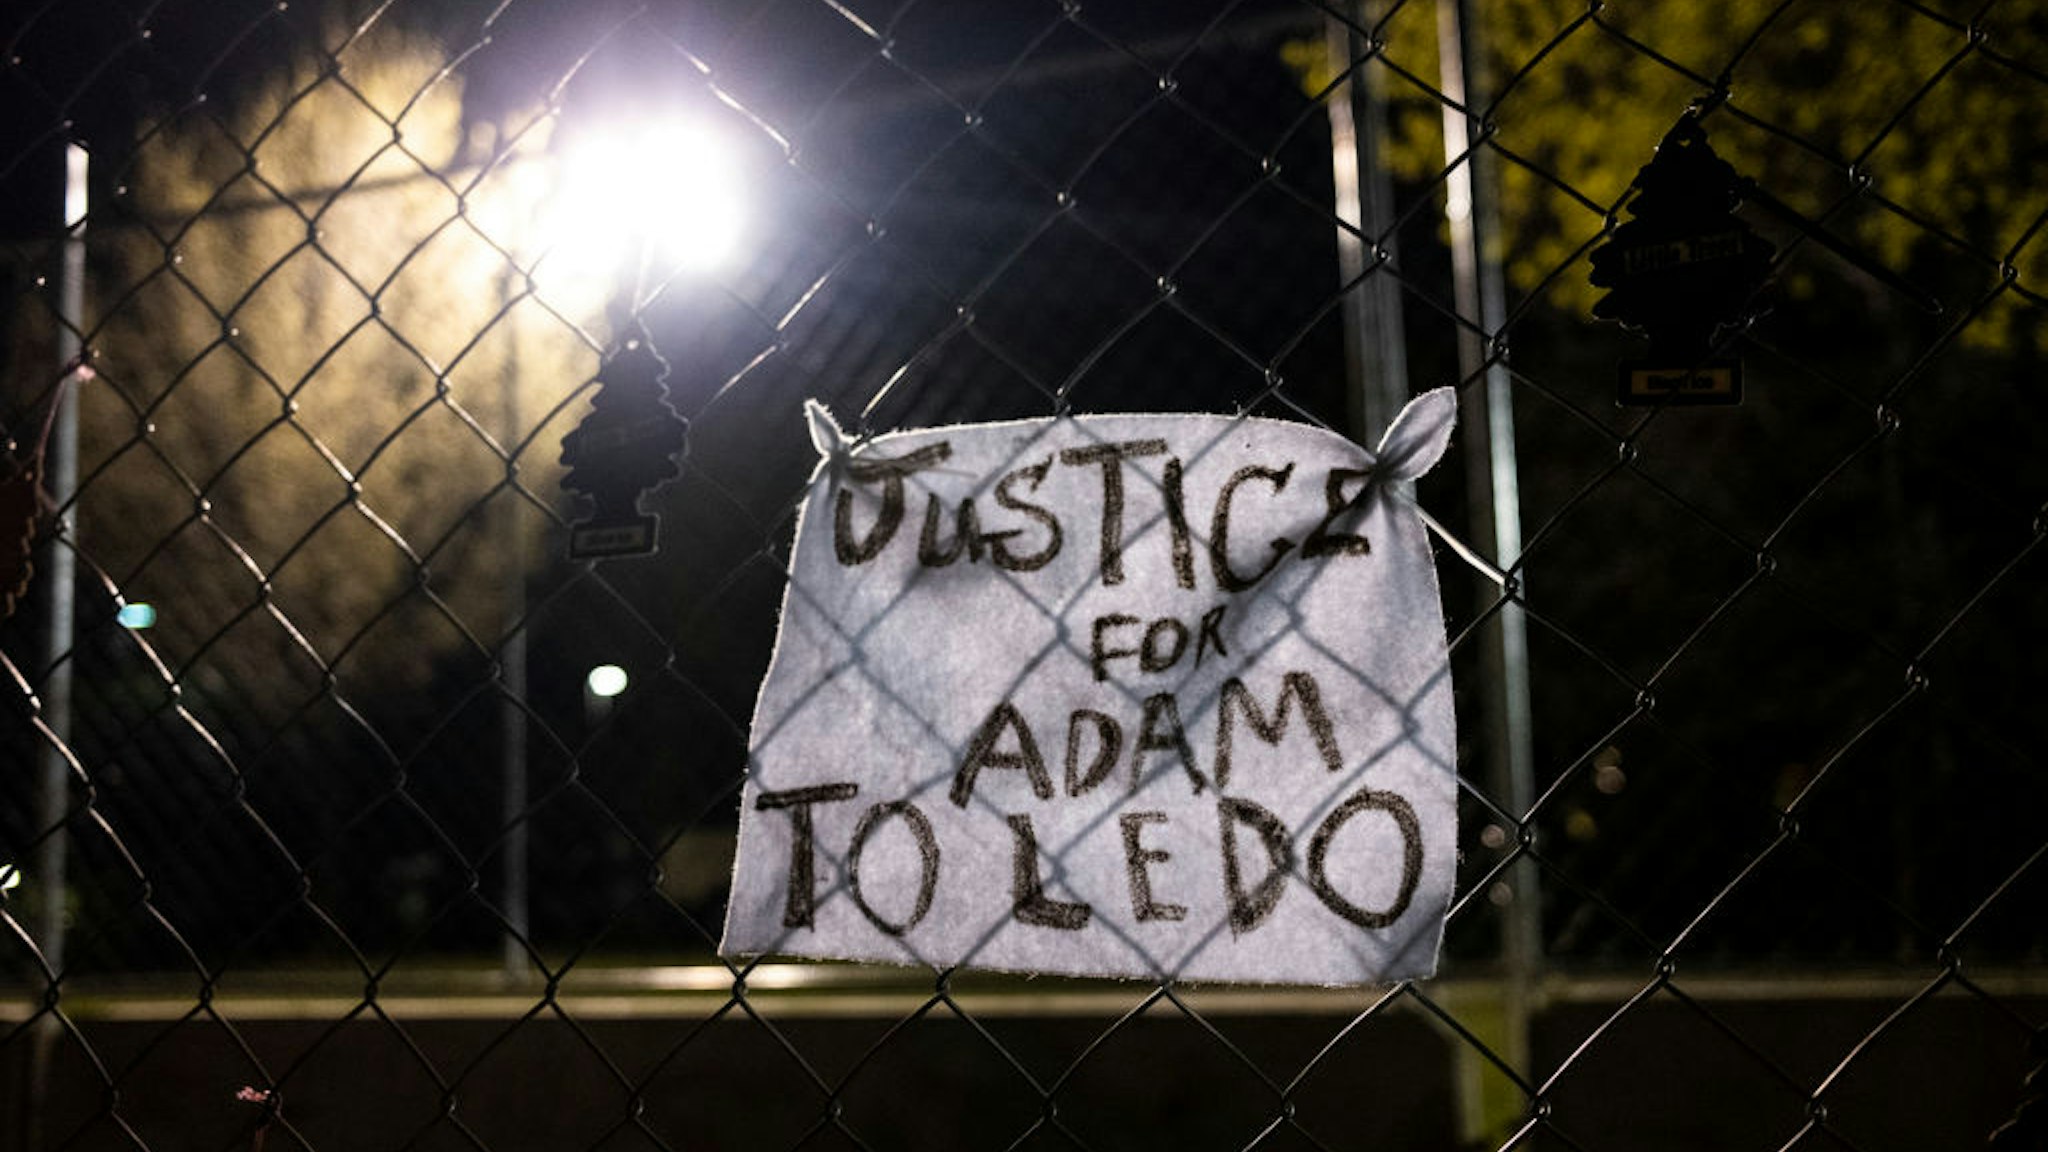 BROOKLYN CENTER, MN - APRIL 17: A piece of cloth with a note reading "Justice for Adam Toledo" is affixed to fencing outside the Brooklyn Center police station on April 17, 2021 in Brooklyn Center, Minnesota. This is the seventh day of protests in the suburban Minneapolis city following the fatal shooting of 20-year-old Daunte Wright by Brooklyn Center police officer Kimberly Potter, who has since resigned from the force and today was charged with second-degree manslaughter. (Photo by Stephen Maturen/Getty Images)